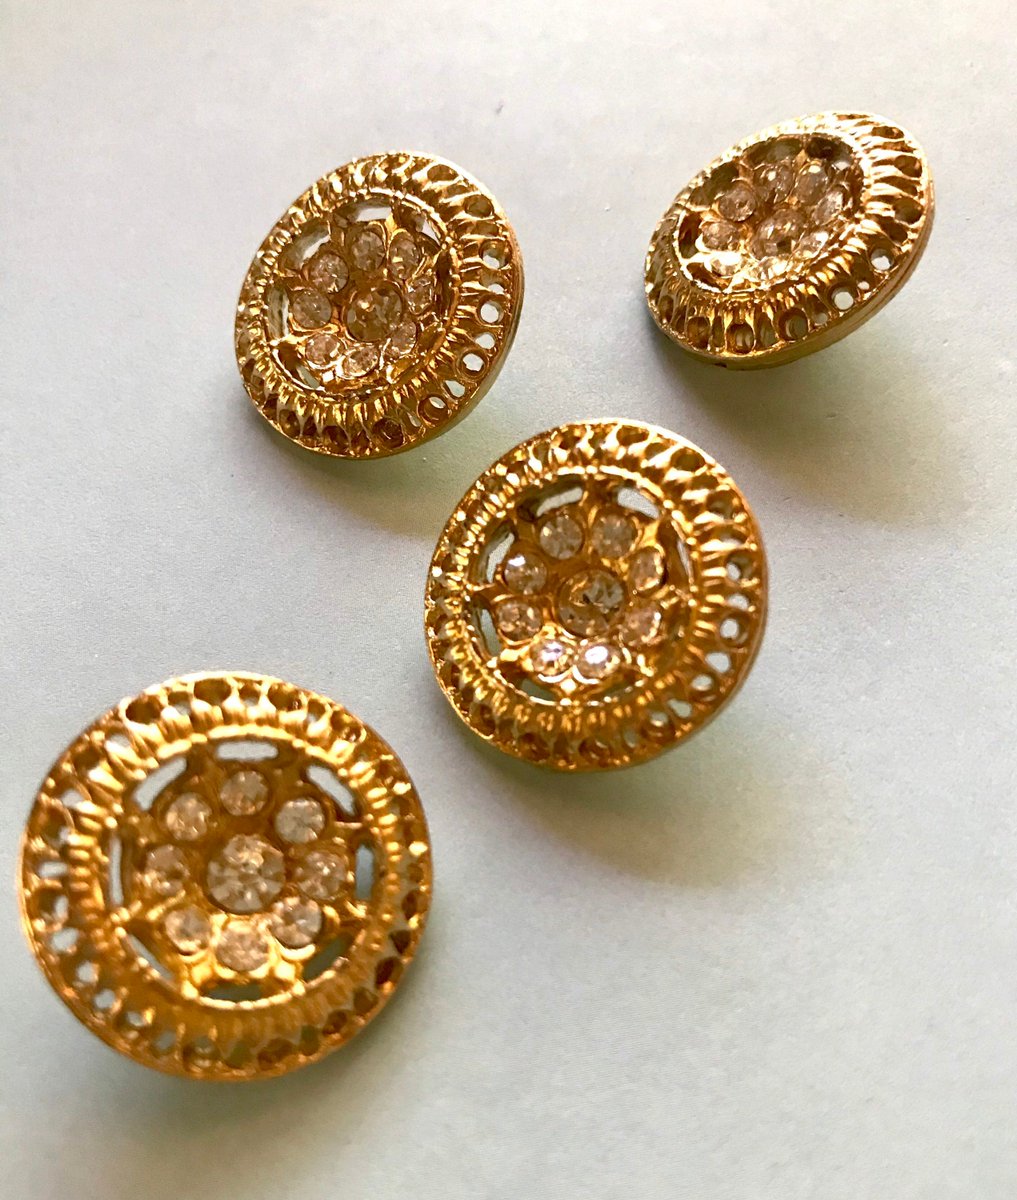 4 gorgeous Vintage 22mm gold metal buttons adorn with beautiful rhinestones with metal shanks Lot of 4 By BySupply tuppu.net/b24095bb #bysupply #Etsy #RepurposingProject